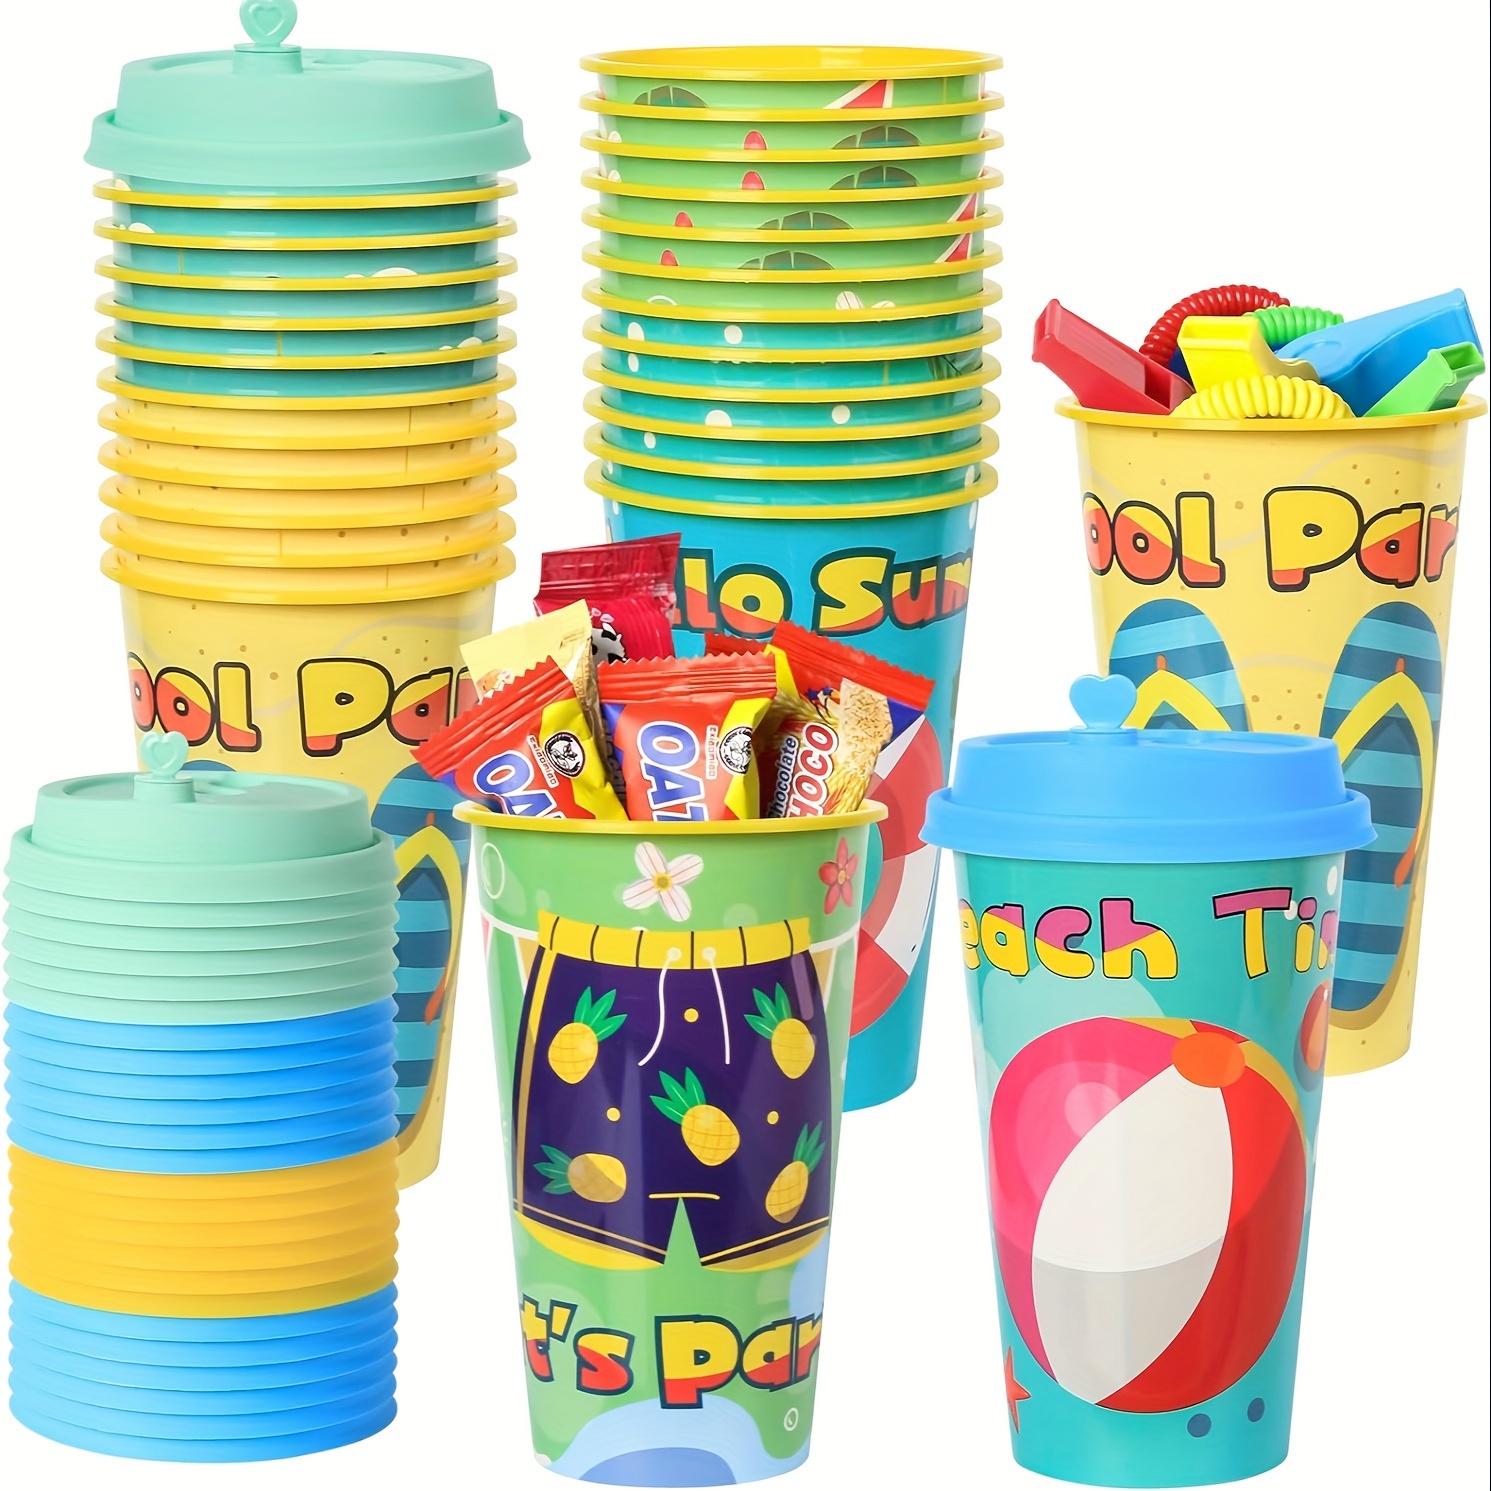 

24 Pack Beach Party Favors Goodie Cups, Birthday Party Cups In 4 Designs, 16oz Reusable Beach Ball Pool Summer Plastic Party Supplies Decorations Cups With Lids Plugs For Kids Baby Shower